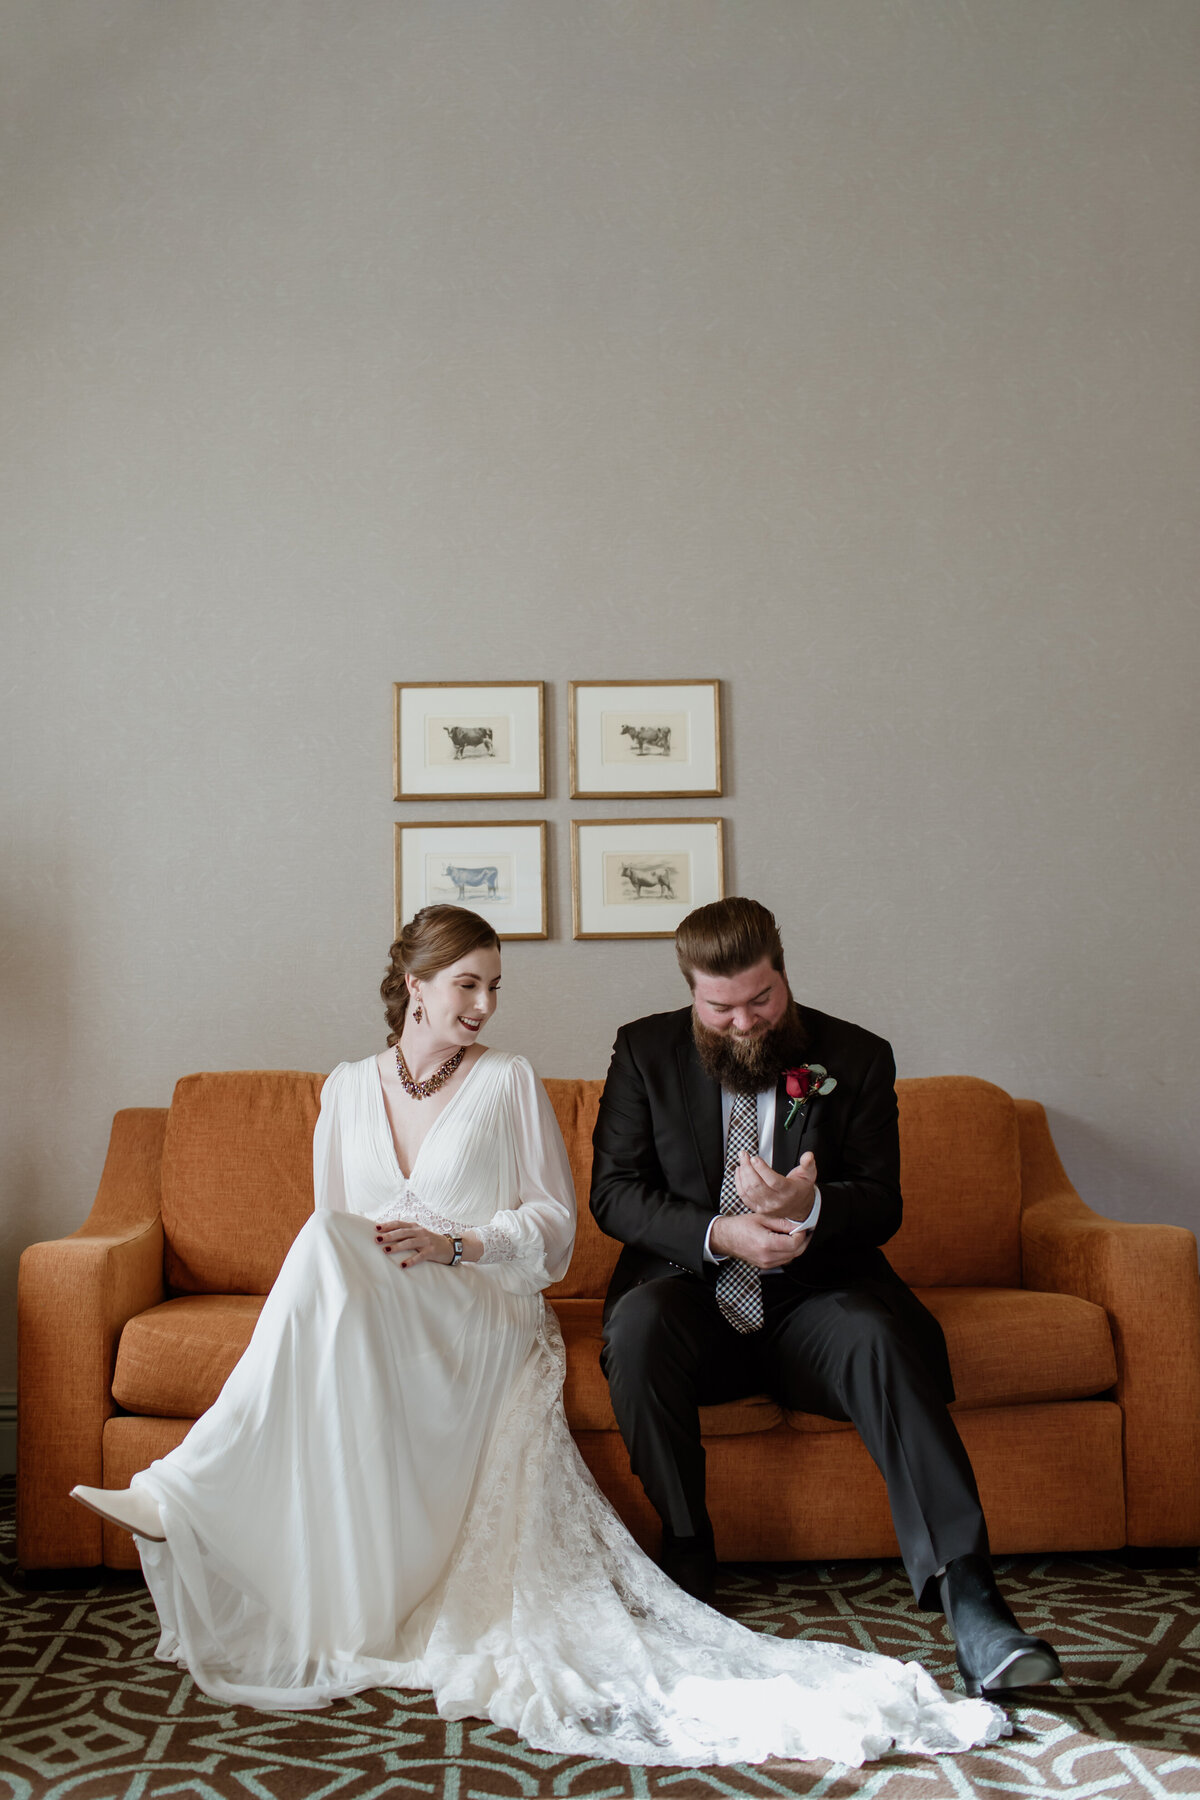 A bride and groom sitting on an orange couch making final adjustments to their clothing candidly captured by Fort Worth wedding photographer, Megan Christine Studio